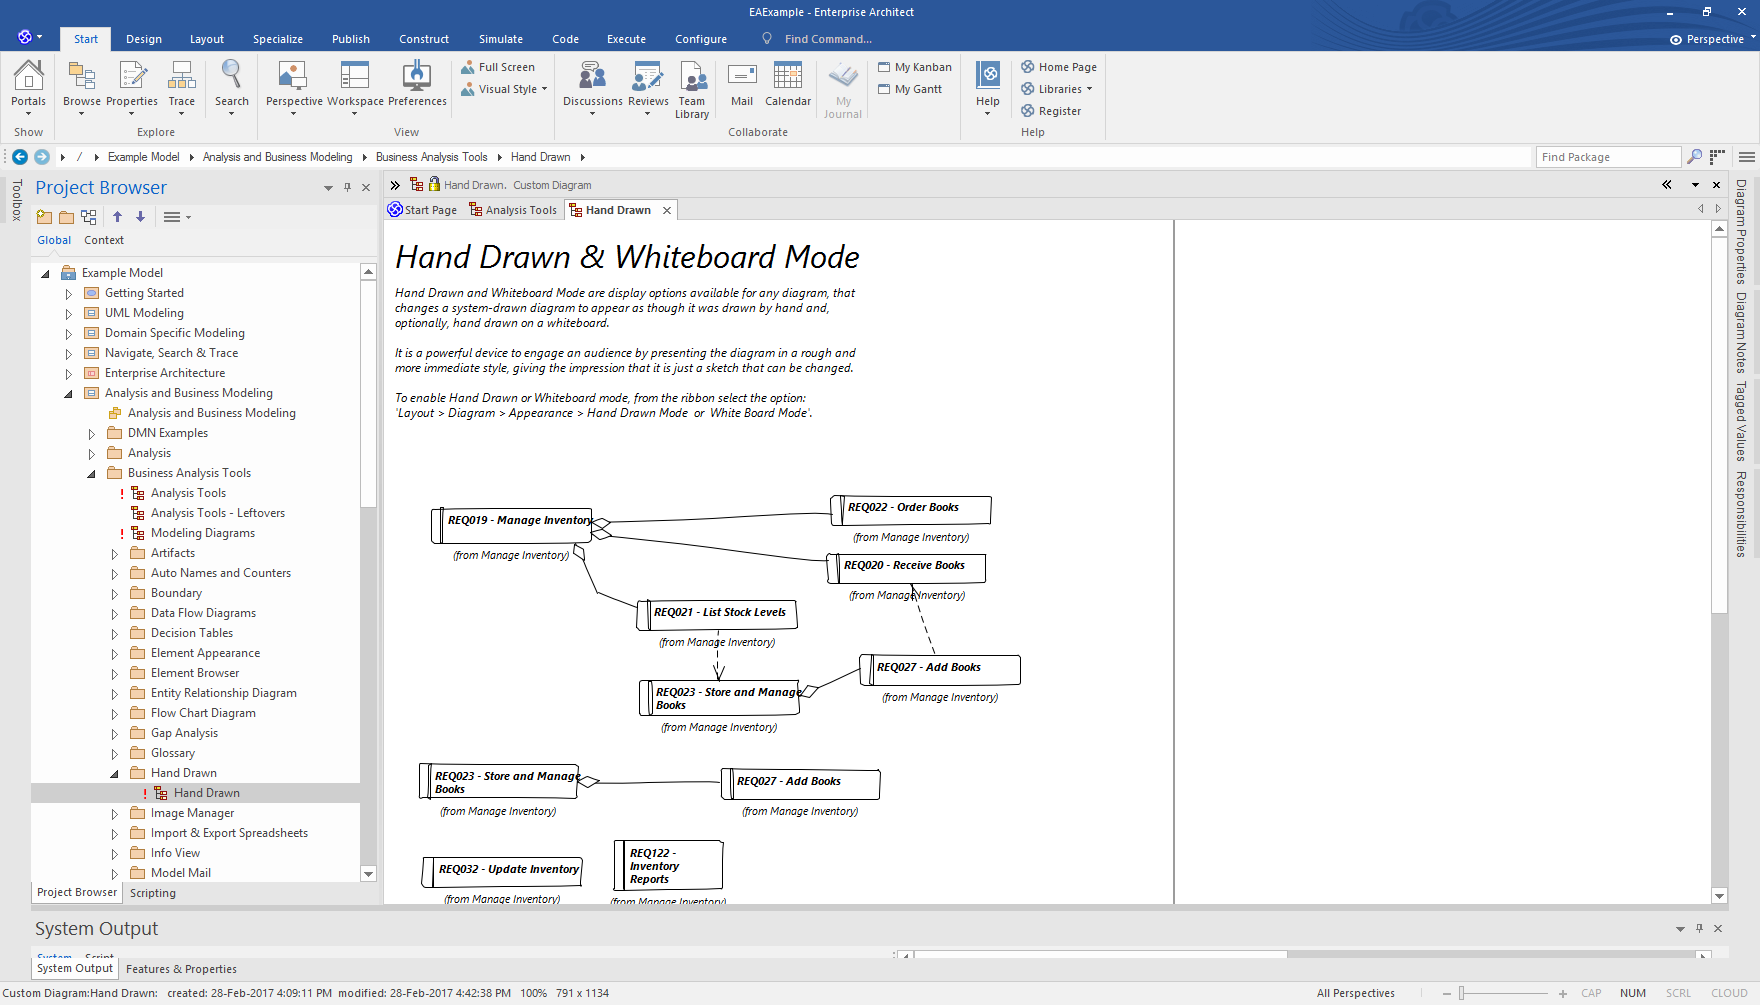 Enterprise Architect Professional Edition: Hand Drawn Mode for diagrams